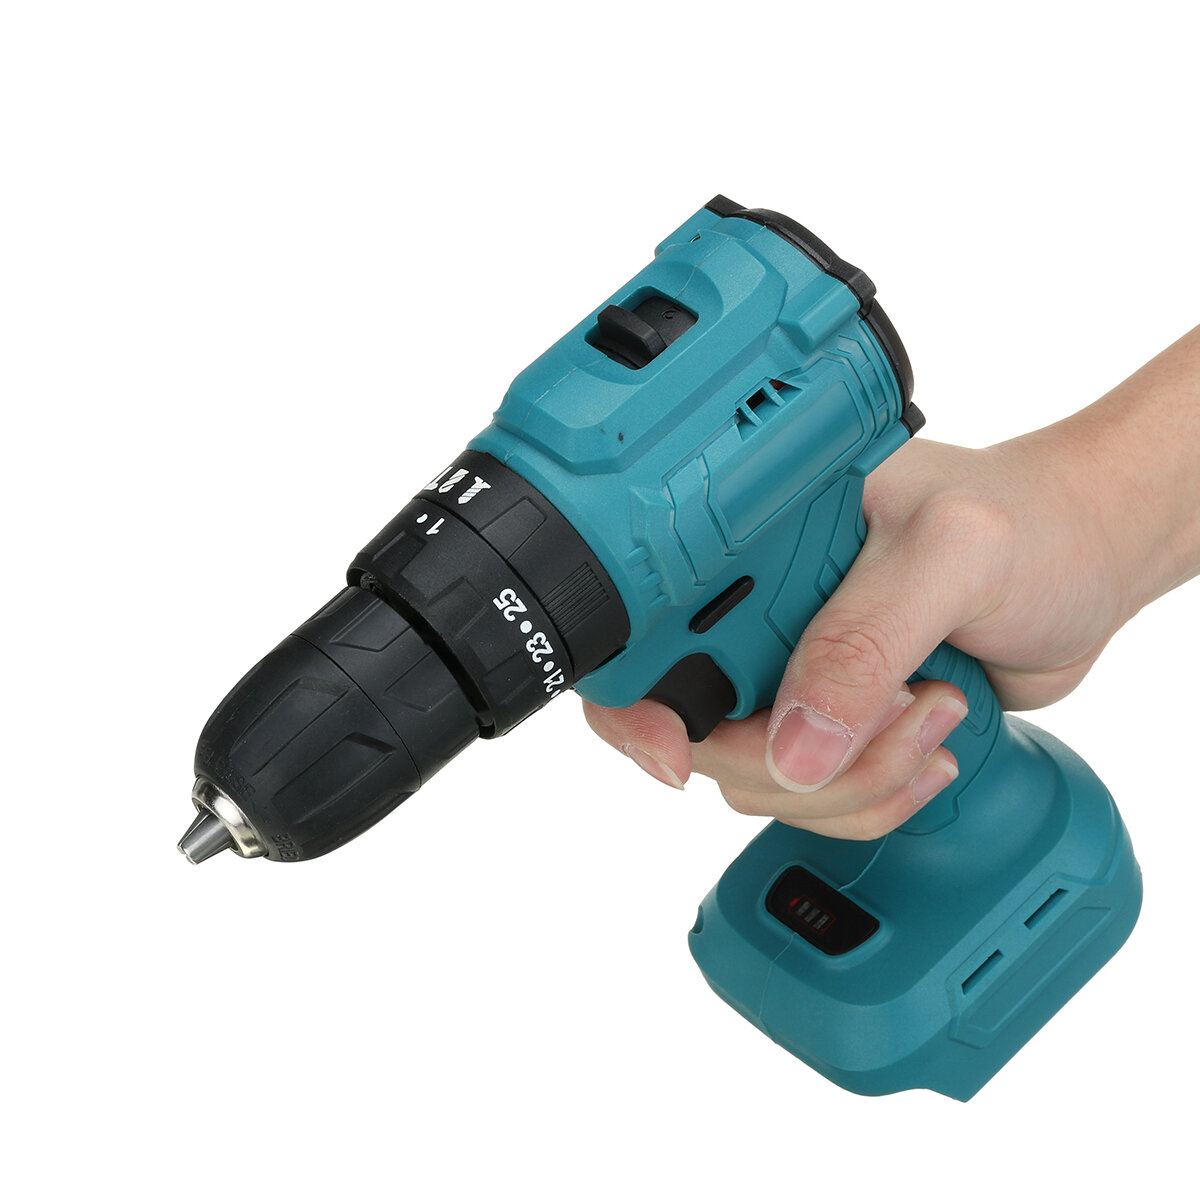 520N.m. Brushless Cordless 3/8'' Impact Drill Driver Replacement for Makita 18V Battery